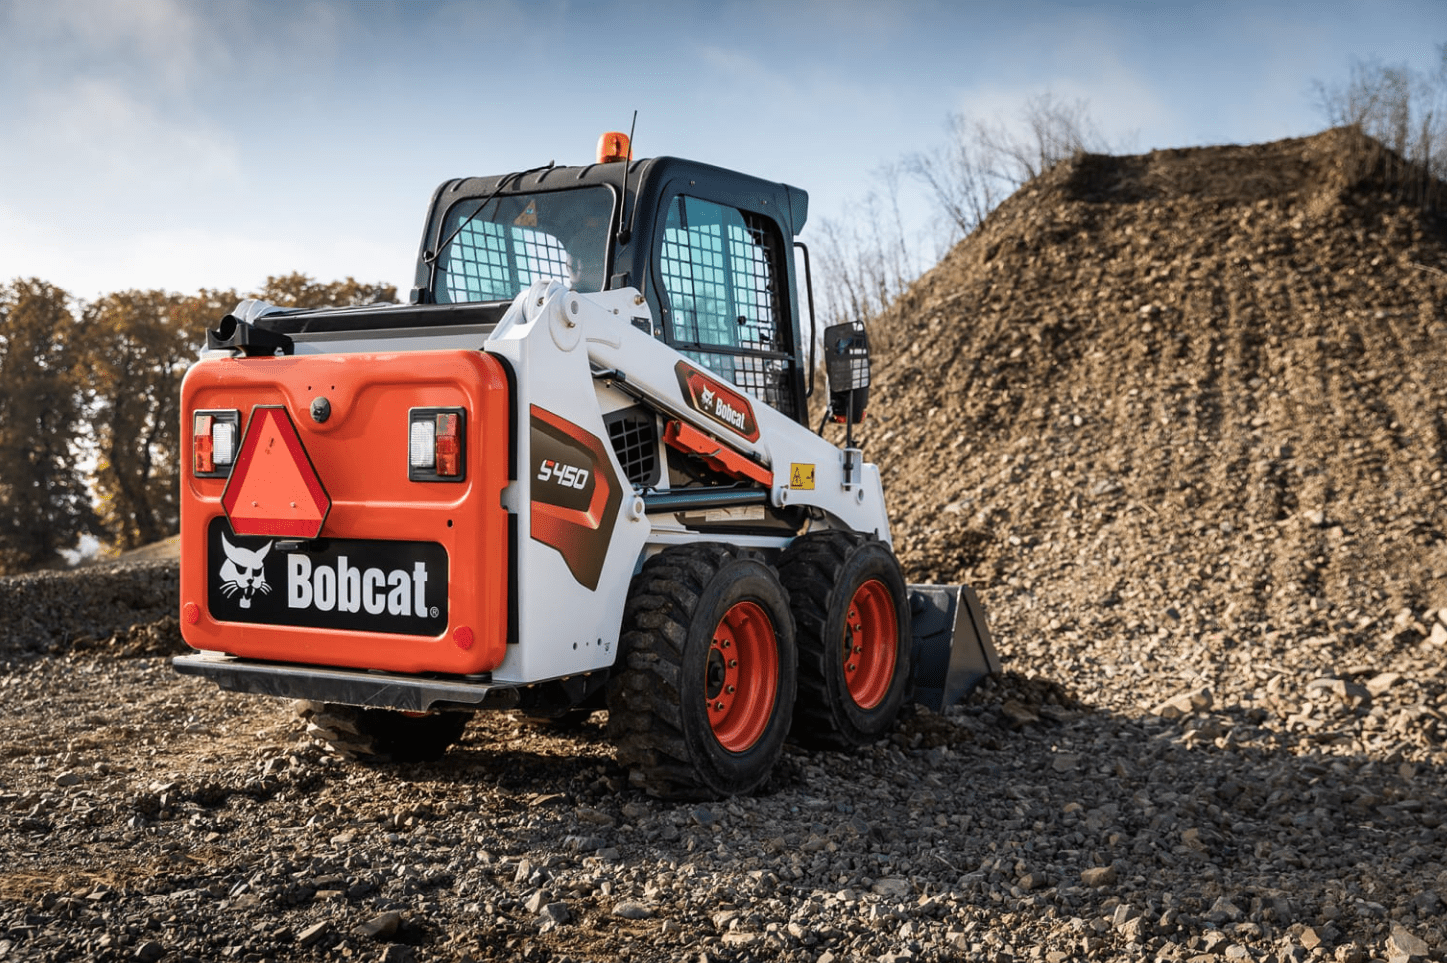 Browse Specs and more for the Bobcat S450 Skid-Steer Loader - Bobcat of the Rockies